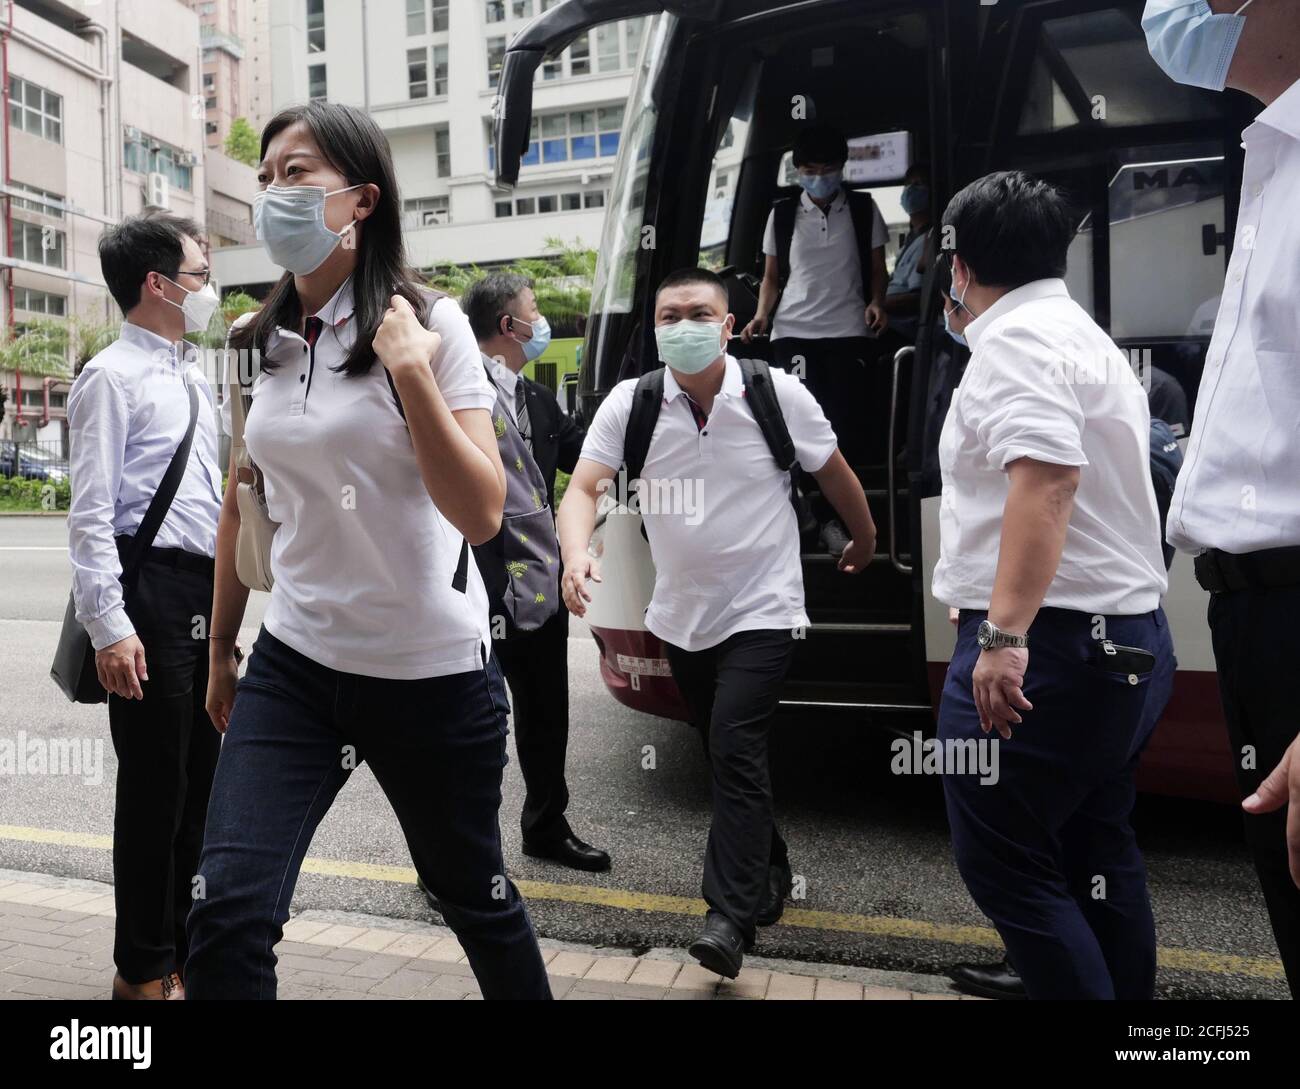 Hong Kong, China. 28th Aug, 2020. Members of a nucleic testing support team from the Chinese mainland arrive at the Metropark Hotel Kowloon in Hong Kong, south China, Aug. 28, 2020. TO GO WITH 'Feature: Mainland medical experts fighting COVID-19 in Hong Kong' Credit: Wang Shen/Xinhua/Alamy Live News Stock Photo